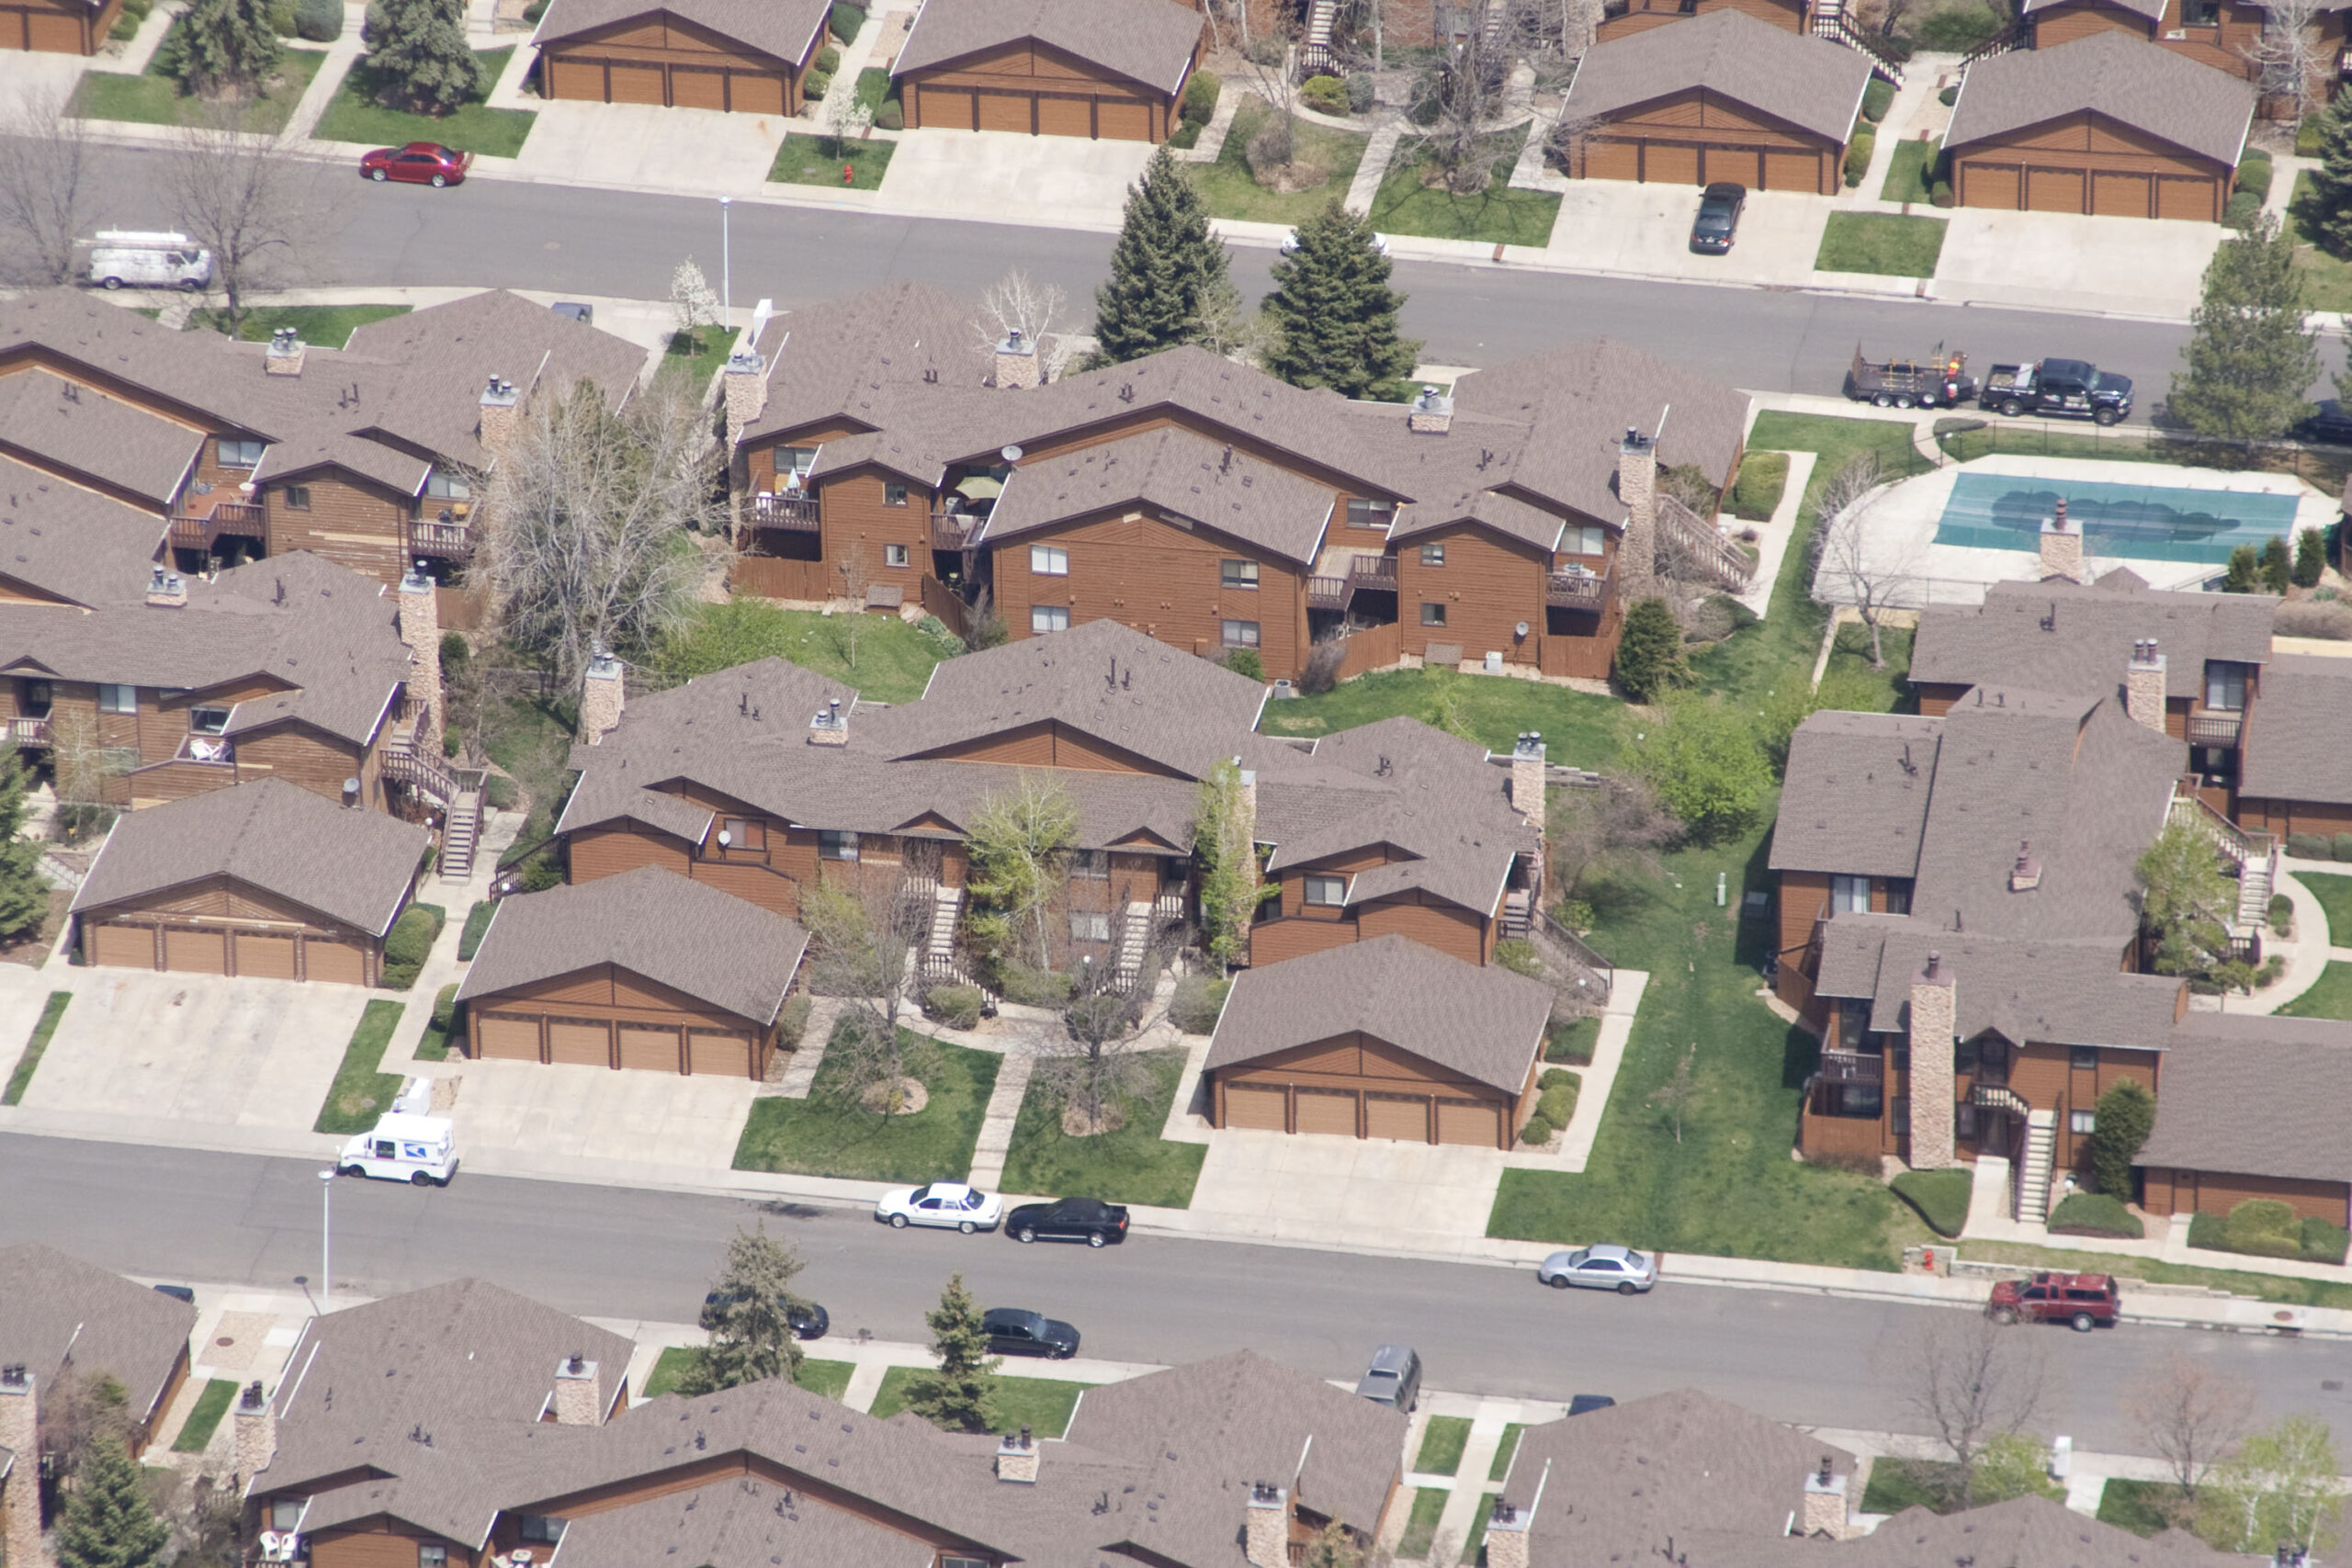 Aerial view of a suburban neighborhood showing a pattern of houses with brown roofs, neatly aligned along curving streets.